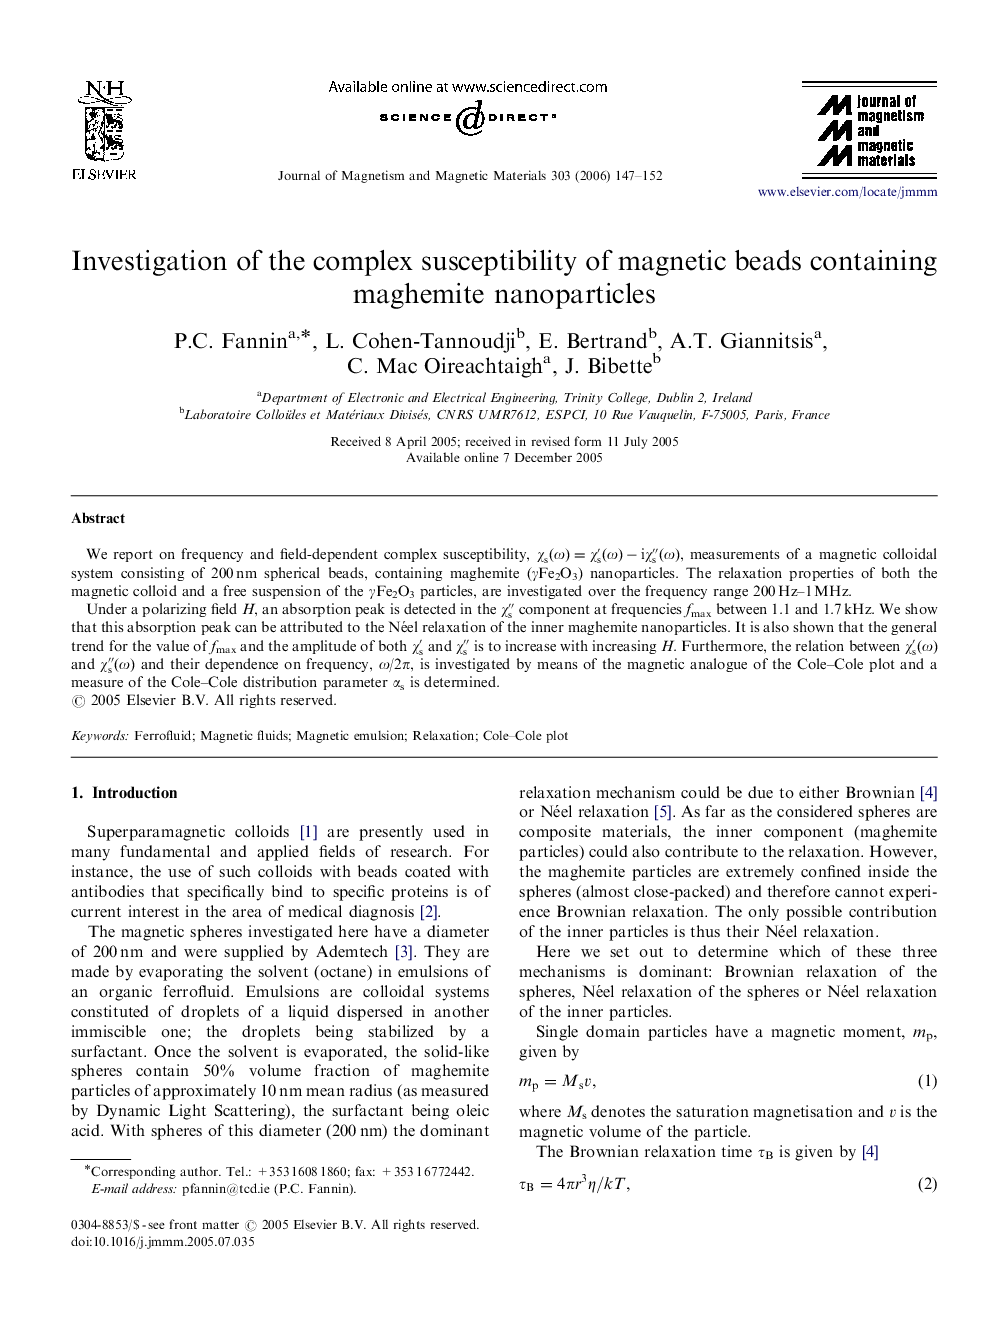 Investigation of the complex susceptibility of magnetic beads containing maghemite nanoparticles